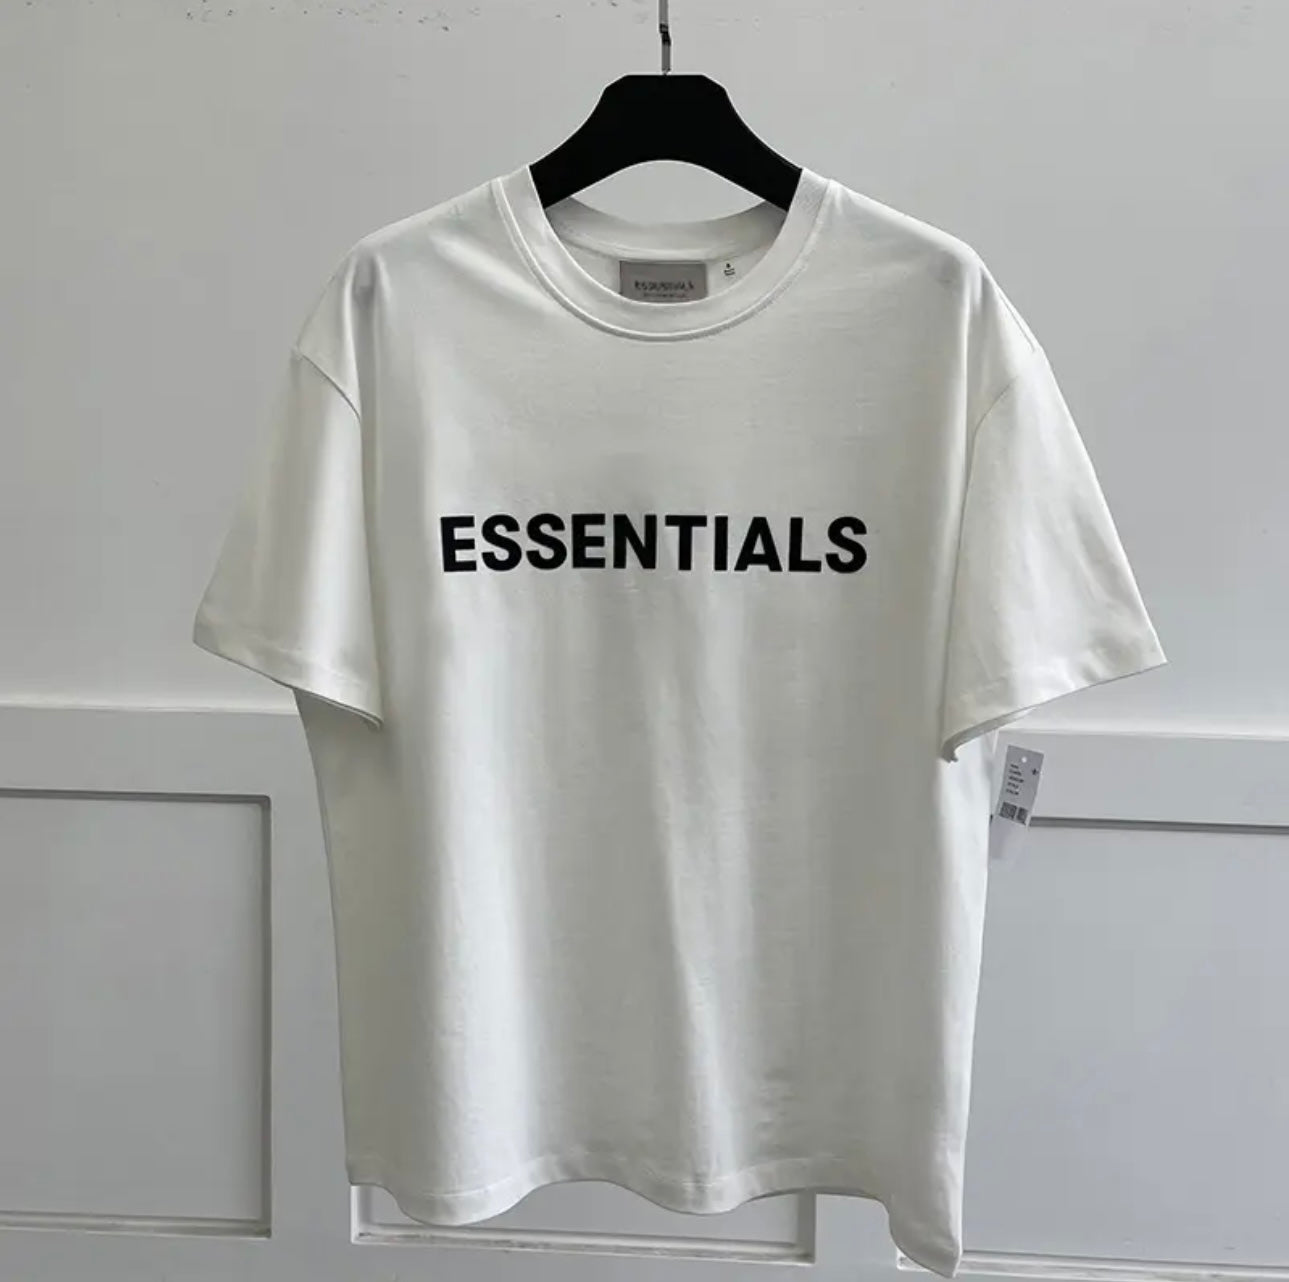 ESSENTIALS Fear of God Men's Short Sleeve Casual Over-Sized T-shirt for Men - Letter Printing Across Chest